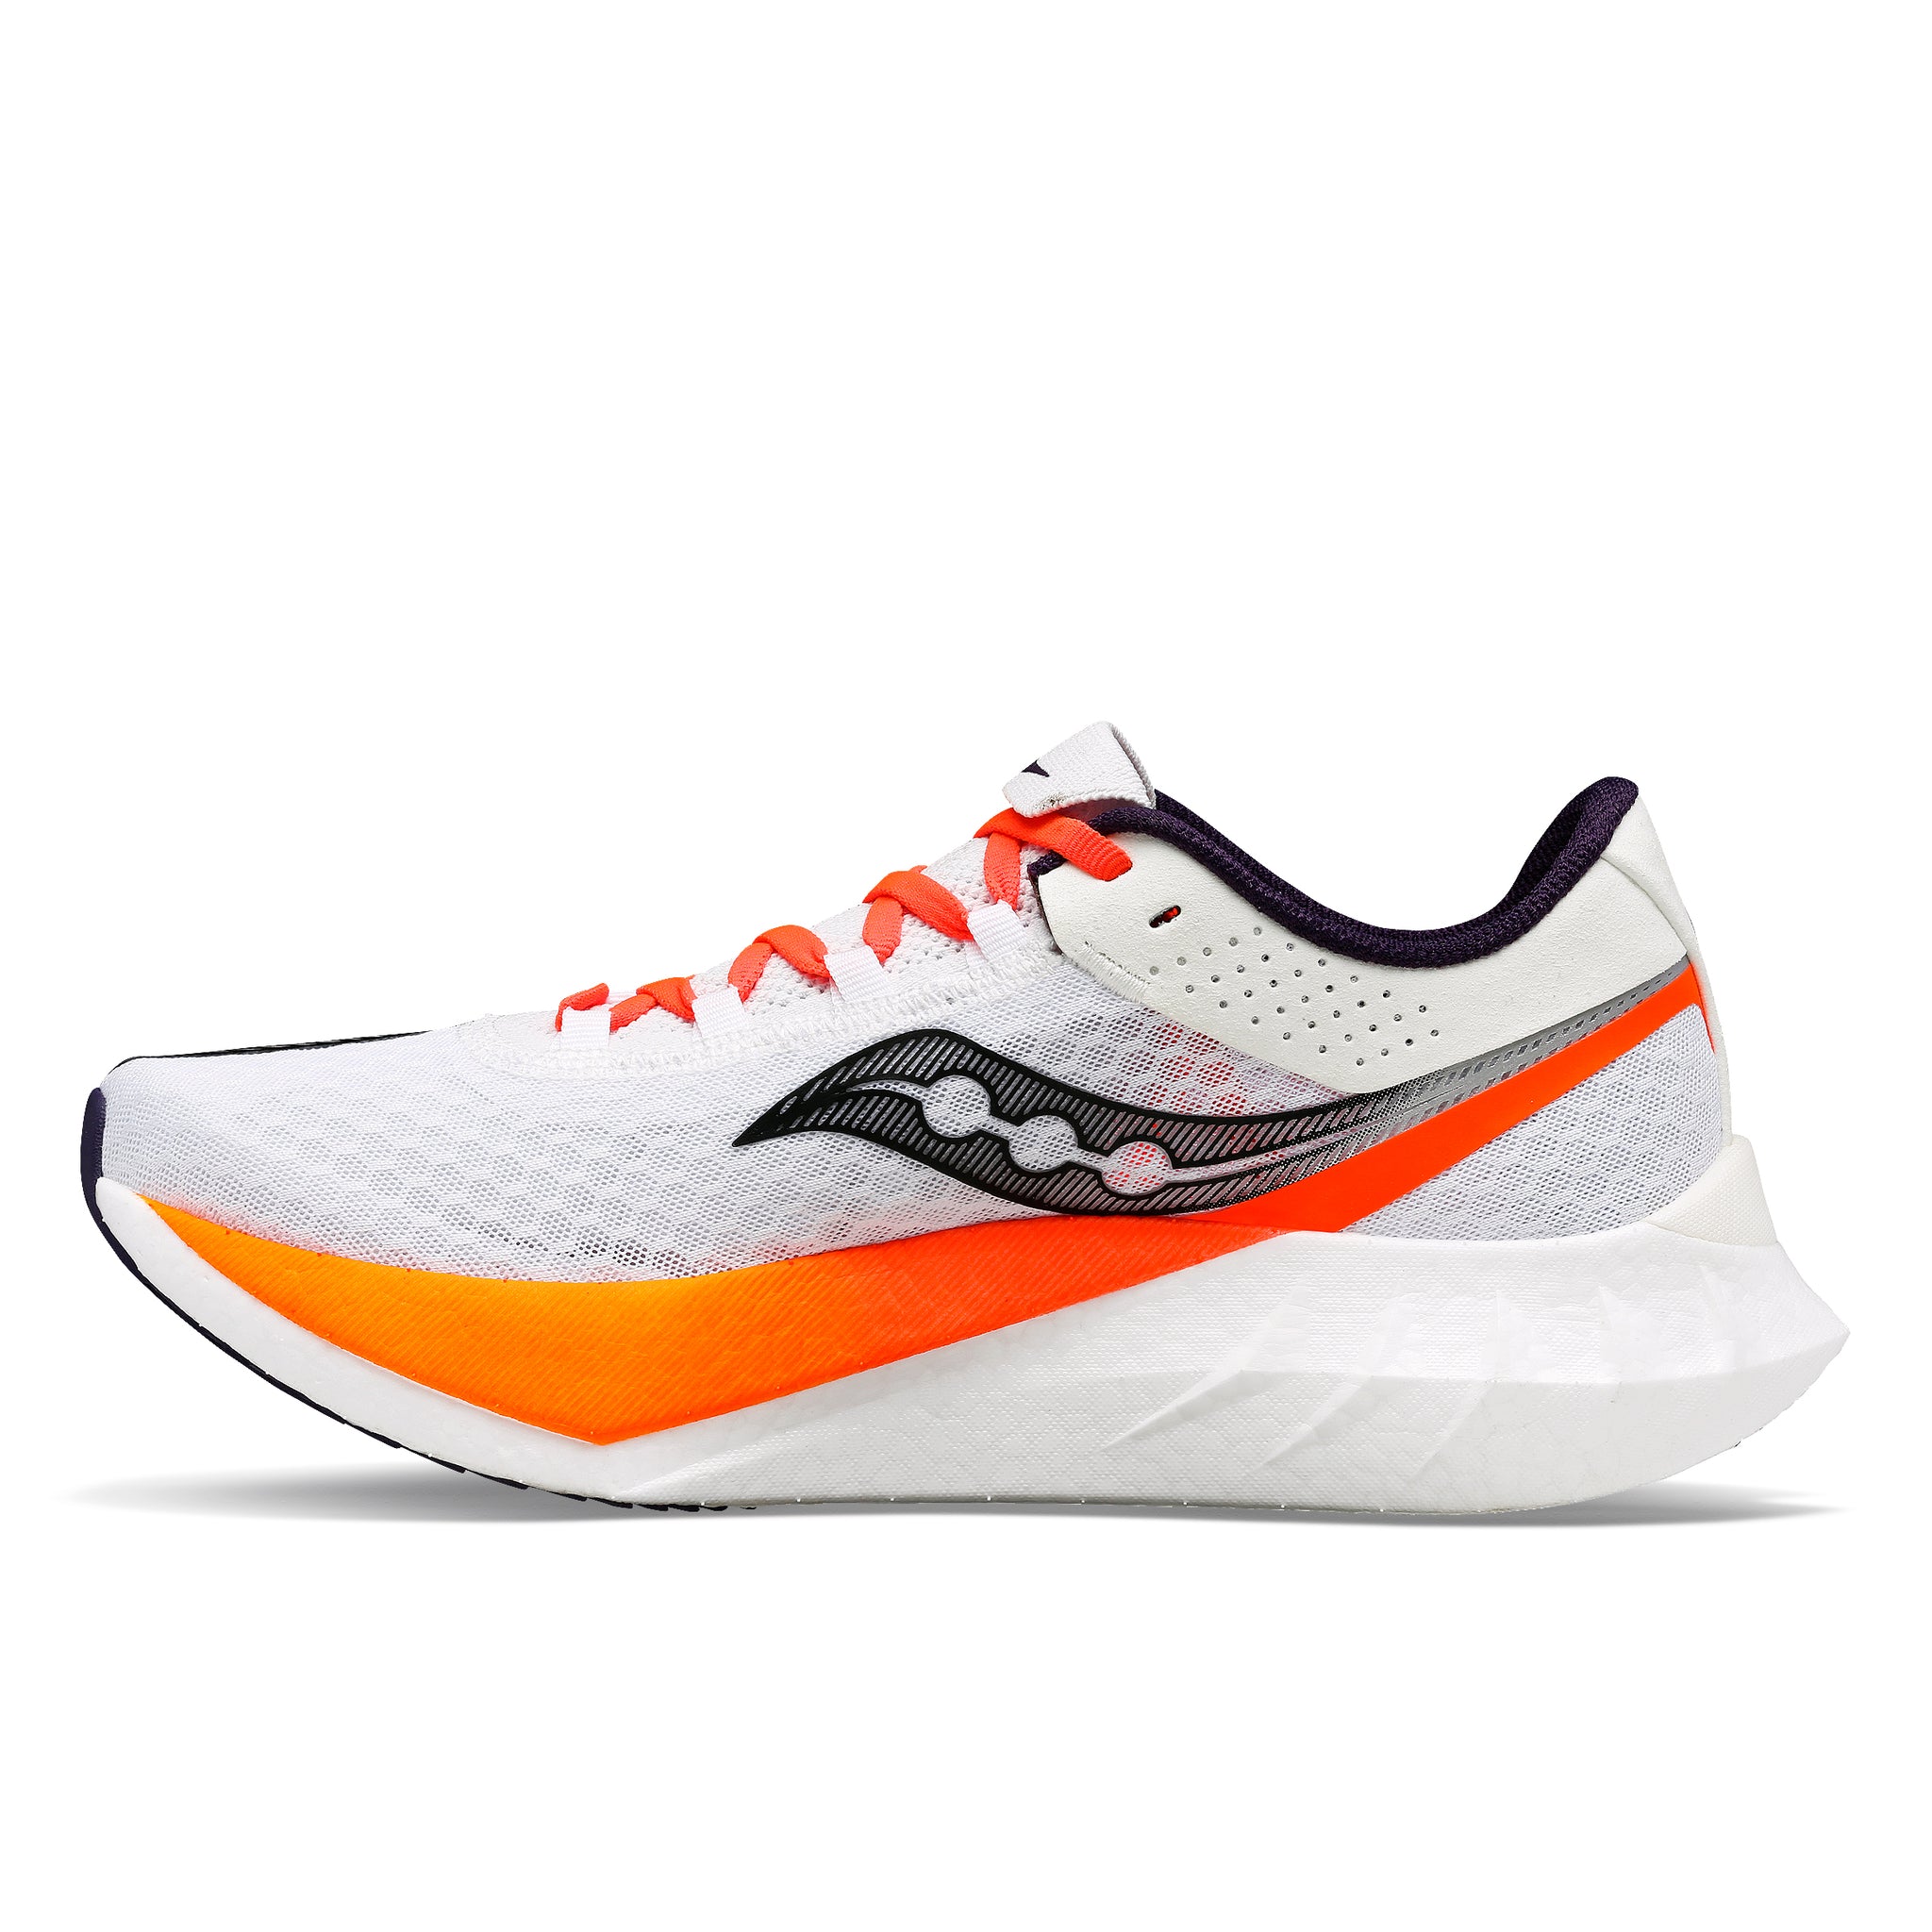 Saucony Endorphin Pro 4 in White and Black